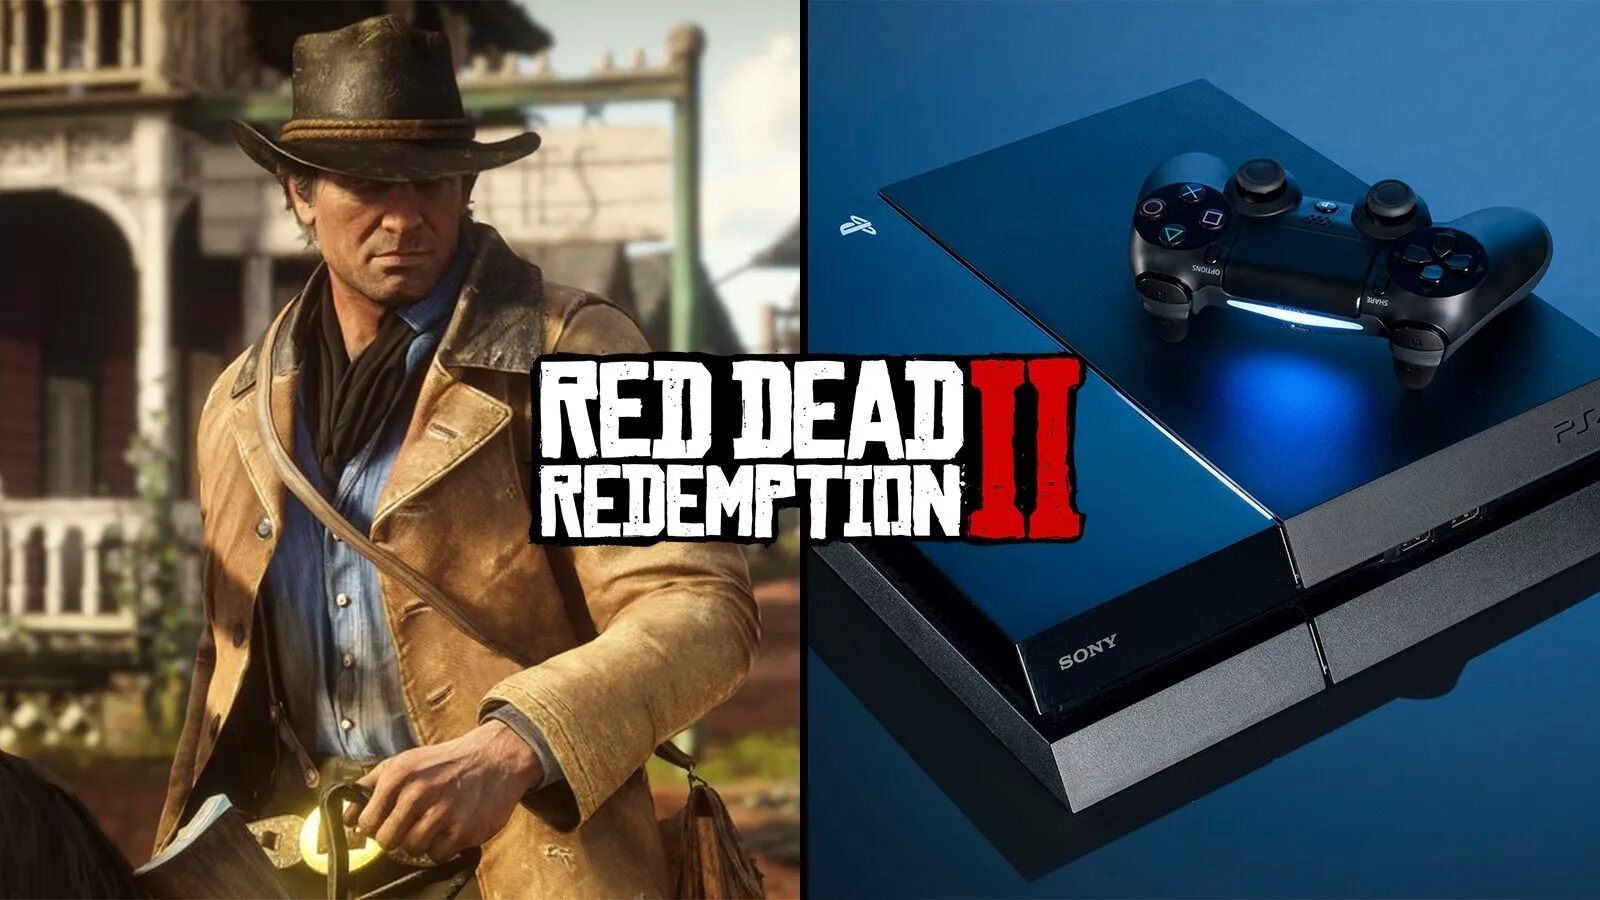 Red redemption 2 купить ps4. Rdr 2 ps4 диск. Red Dead 2 ps4. Red Dead Redemption 2 диск пс4. Sony PLAYSTATION 4 Slim Red Dead Redemption 2.